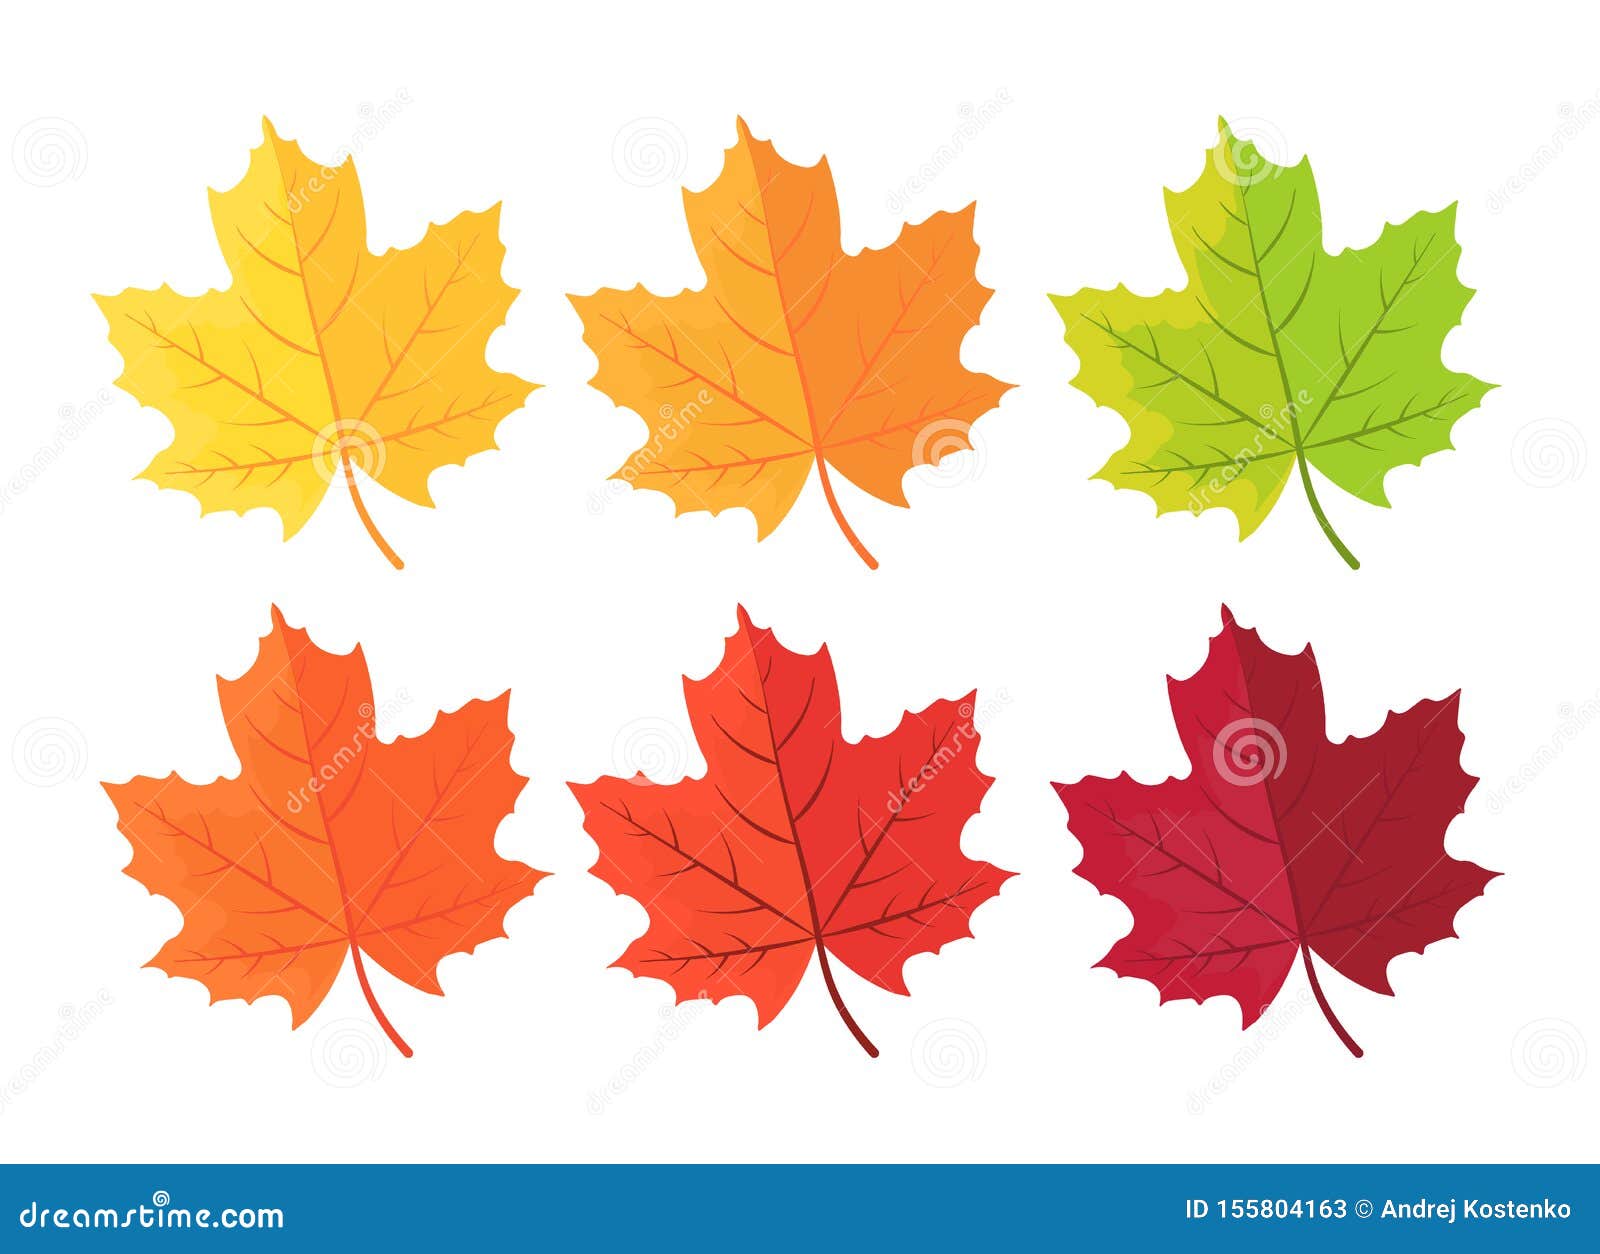 Maple Leaf Cliparts, Stock Vector and Royalty Free Maple Leaf Illustrations